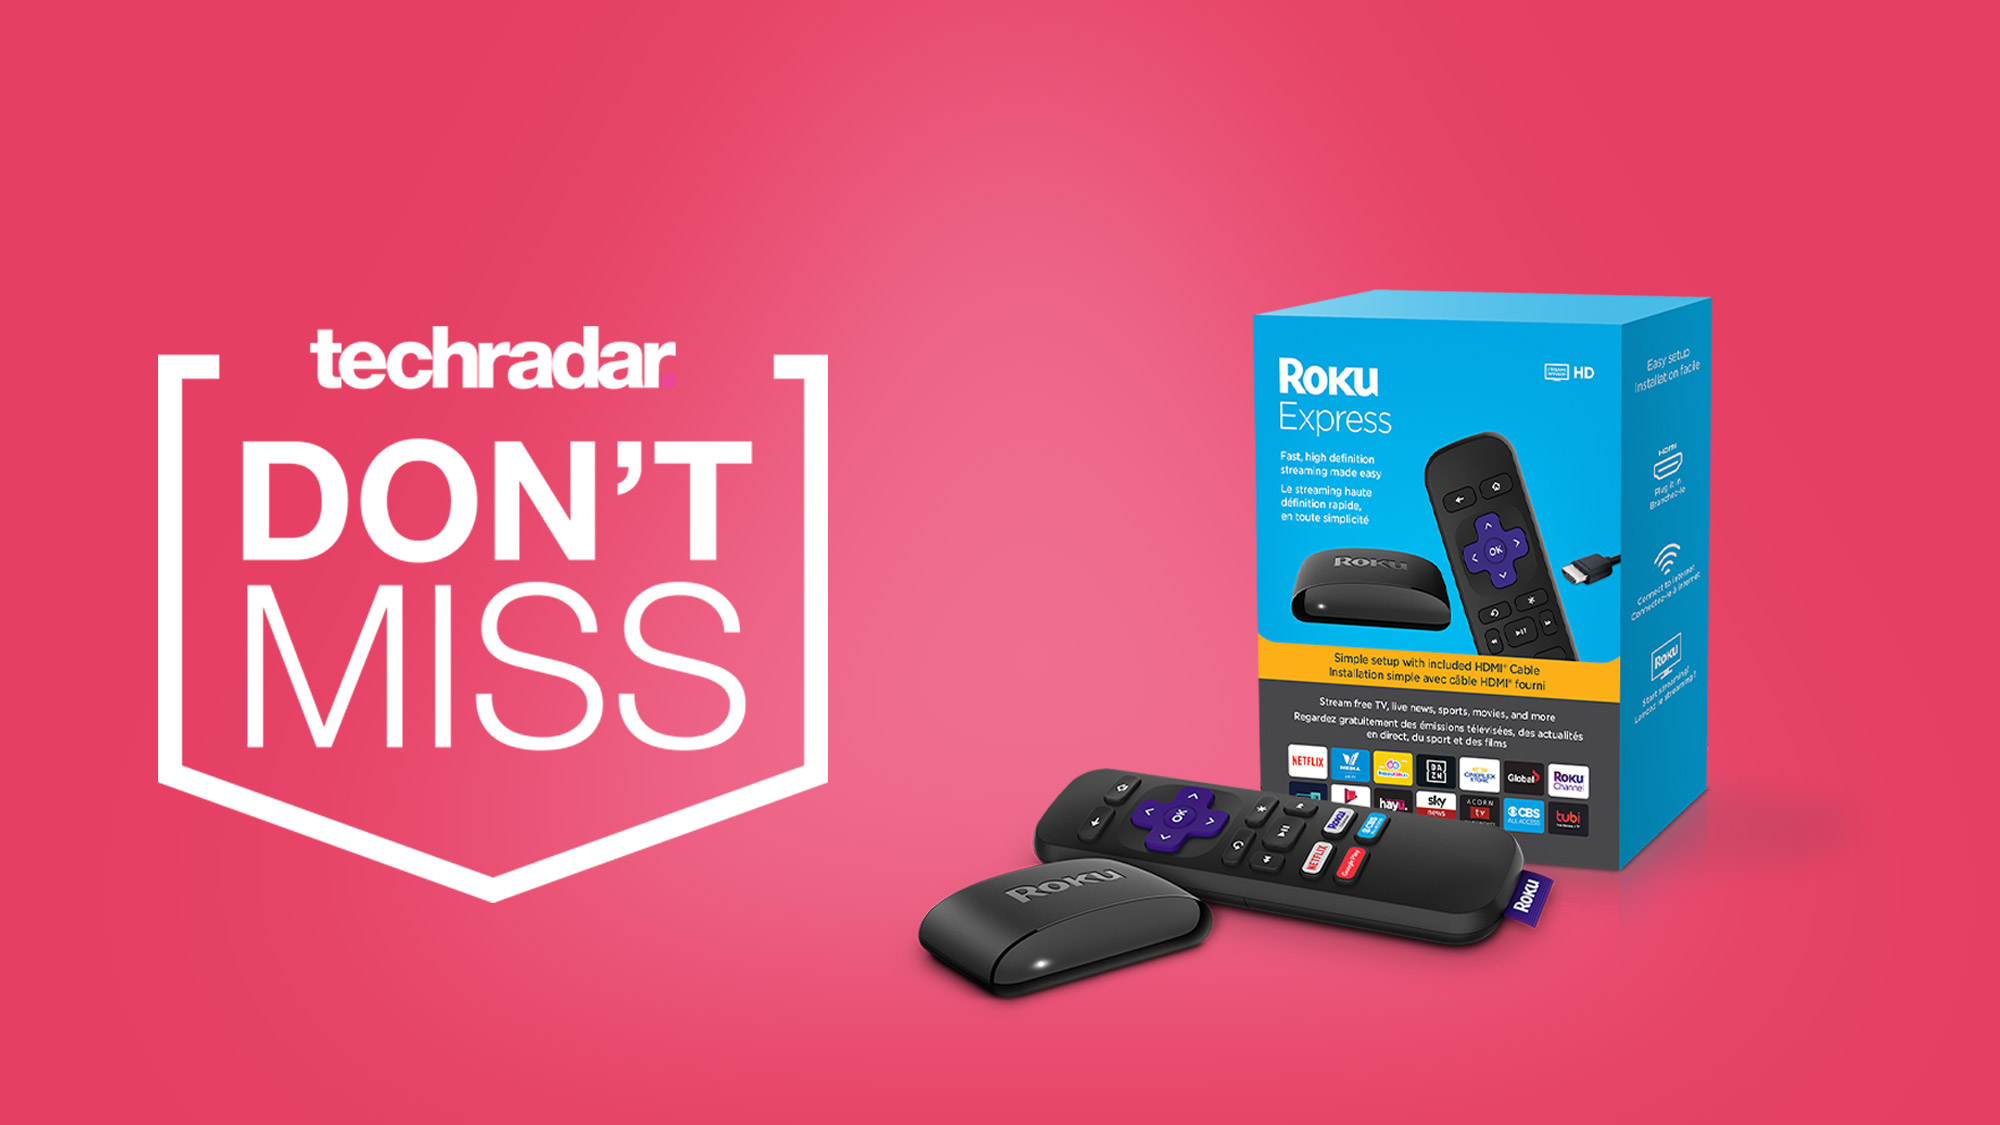 You can get the allnew Roku Express on sale for just 24 at Amazon